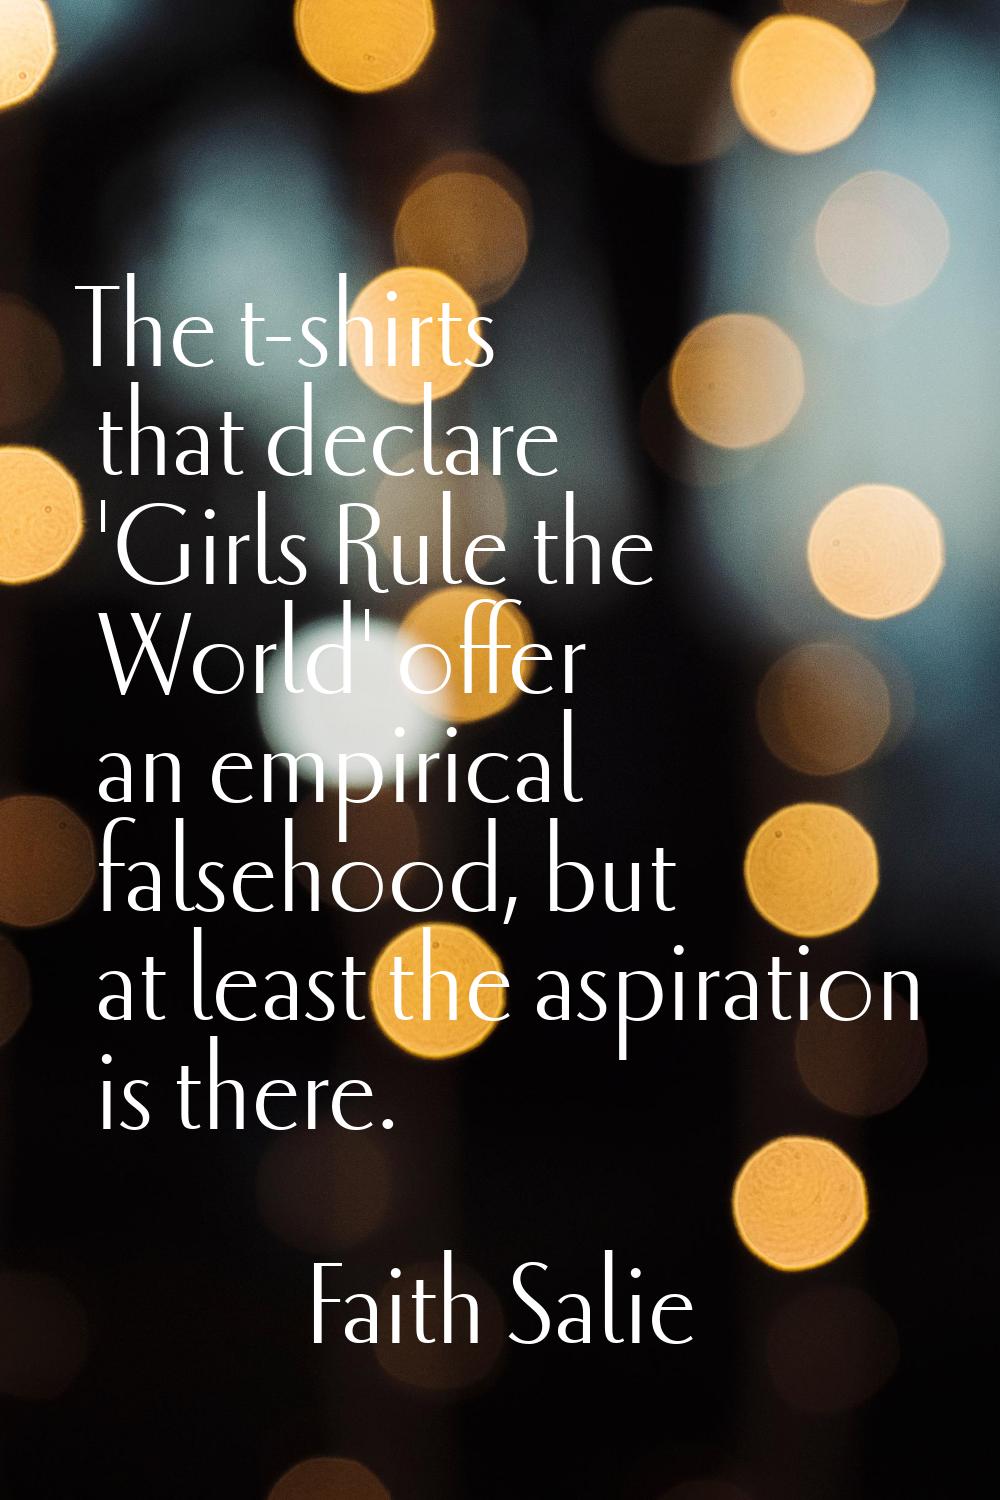 The t-shirts that declare 'Girls Rule the World' offer an empirical falsehood, but at least the asp